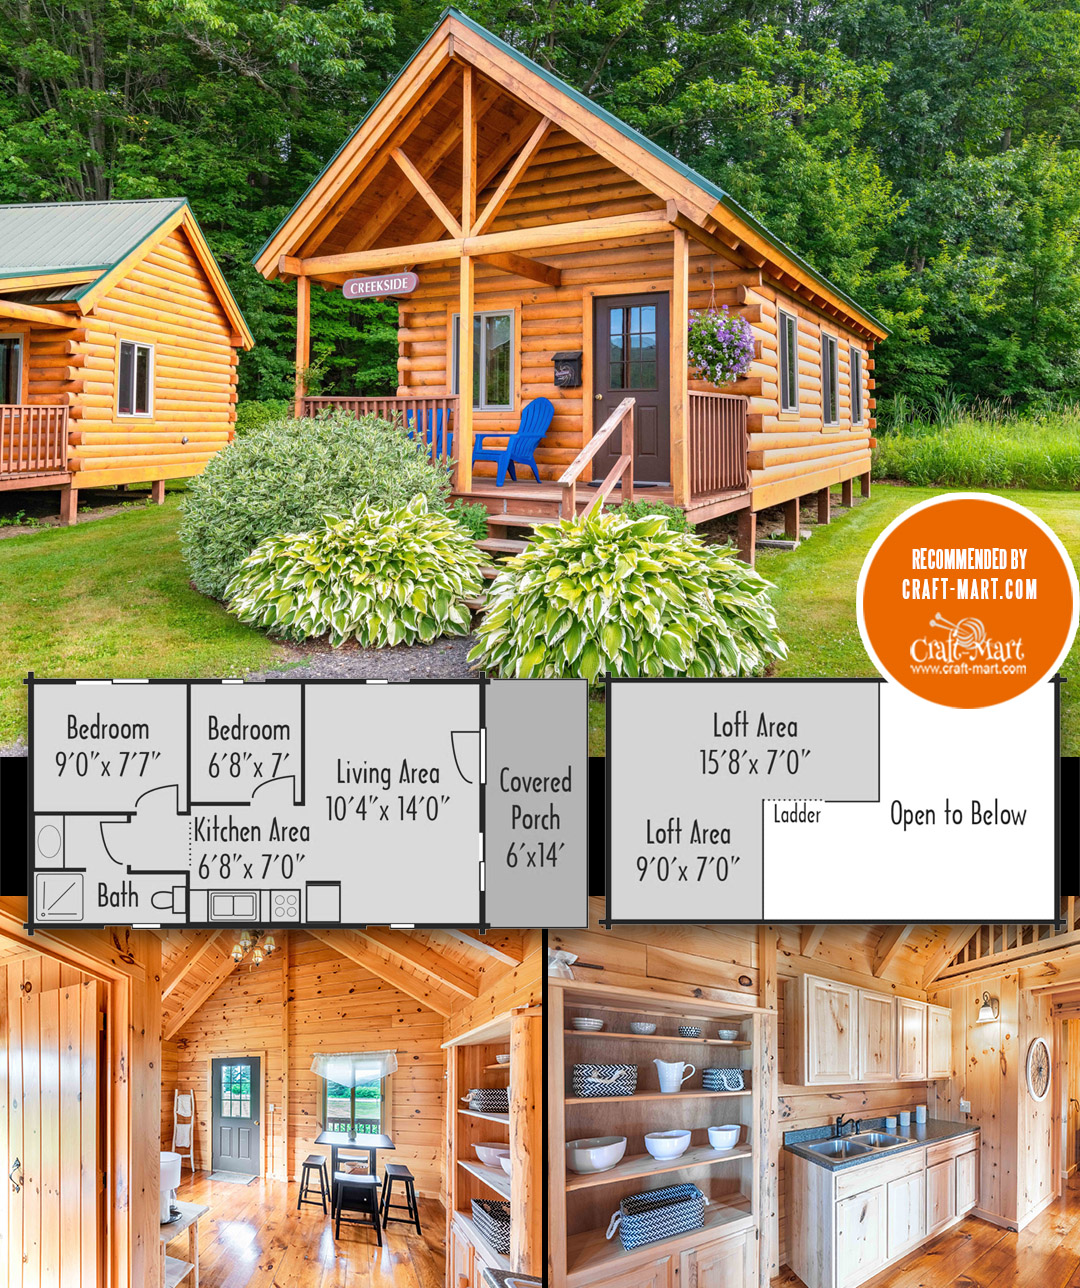 Remember that while log cabins offer these advantages, they may come with a slightly higher construction cost due to increased labor and material expenses. However, many homeowners find the rewards well worth it! 